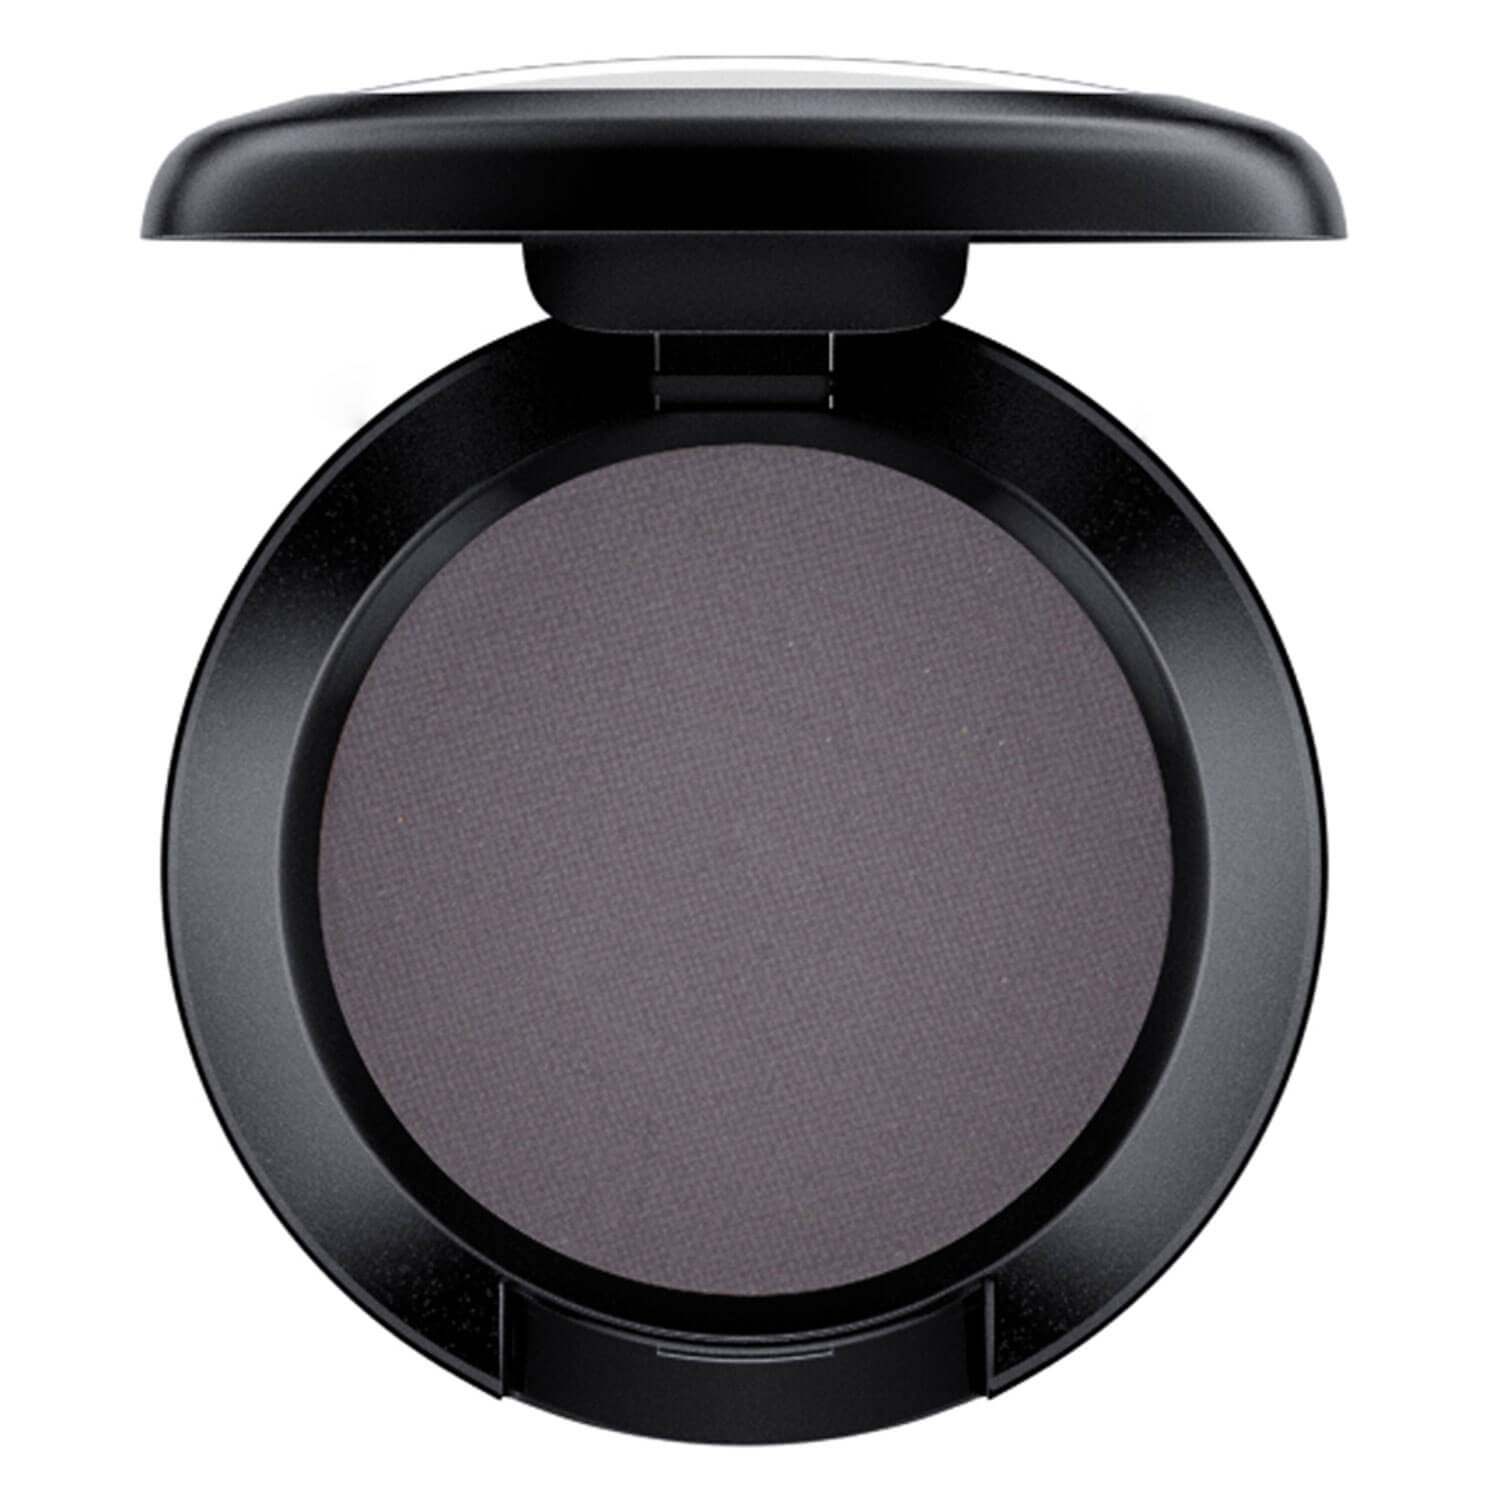 Product image from Visual Arts - Small Eye Shadow Matte Greystone